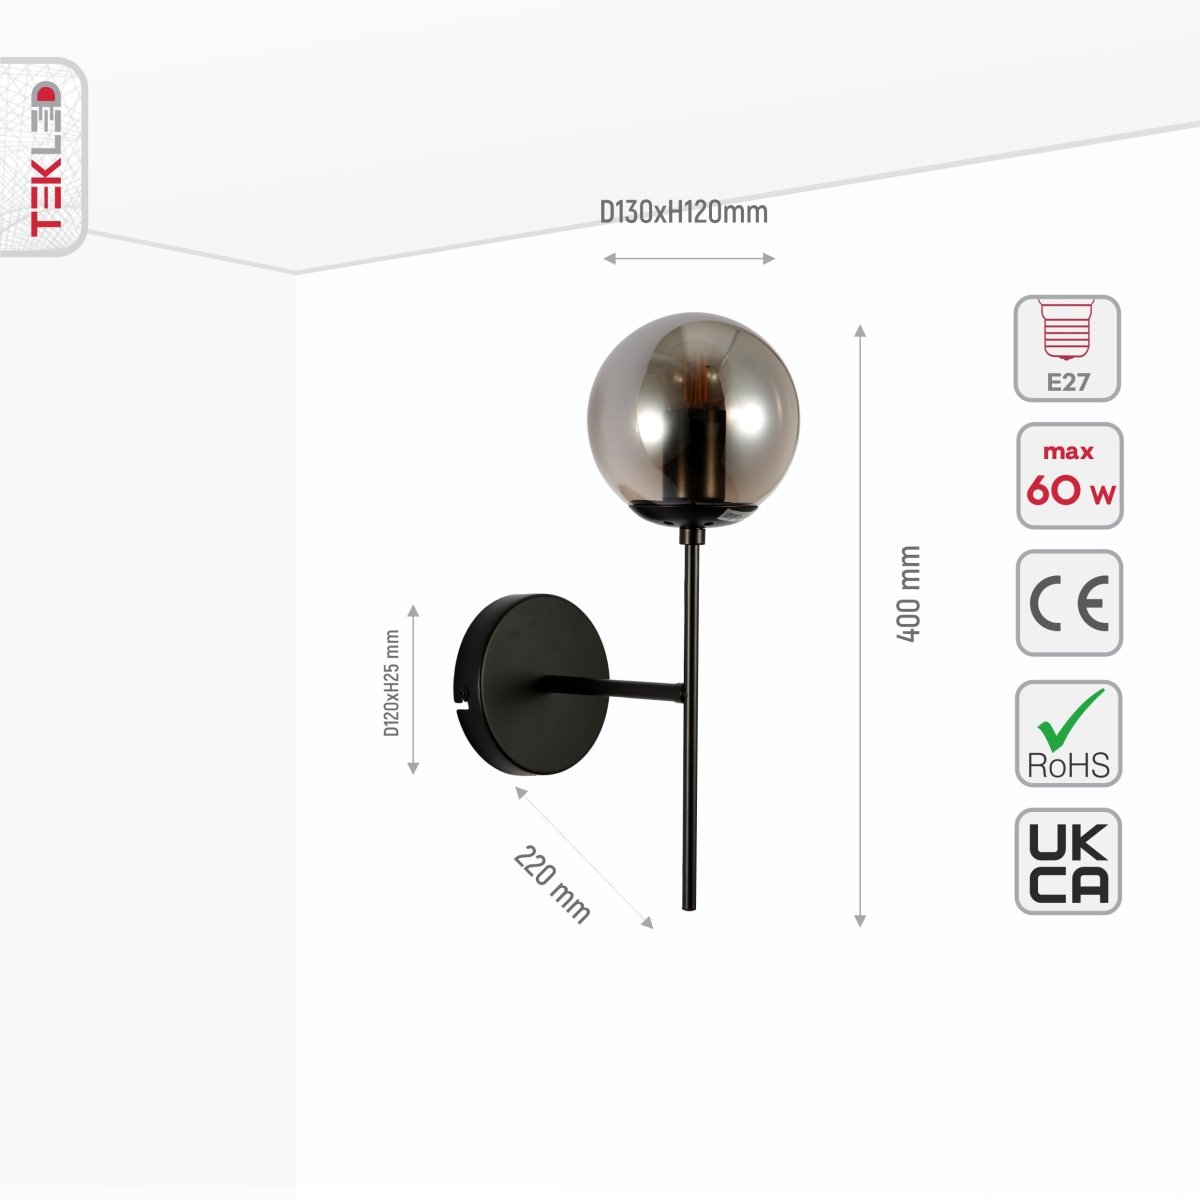 Size and specs of Smoky Glass Black Metal Wall Light with E27 Fitting | TEKLED 151-19712